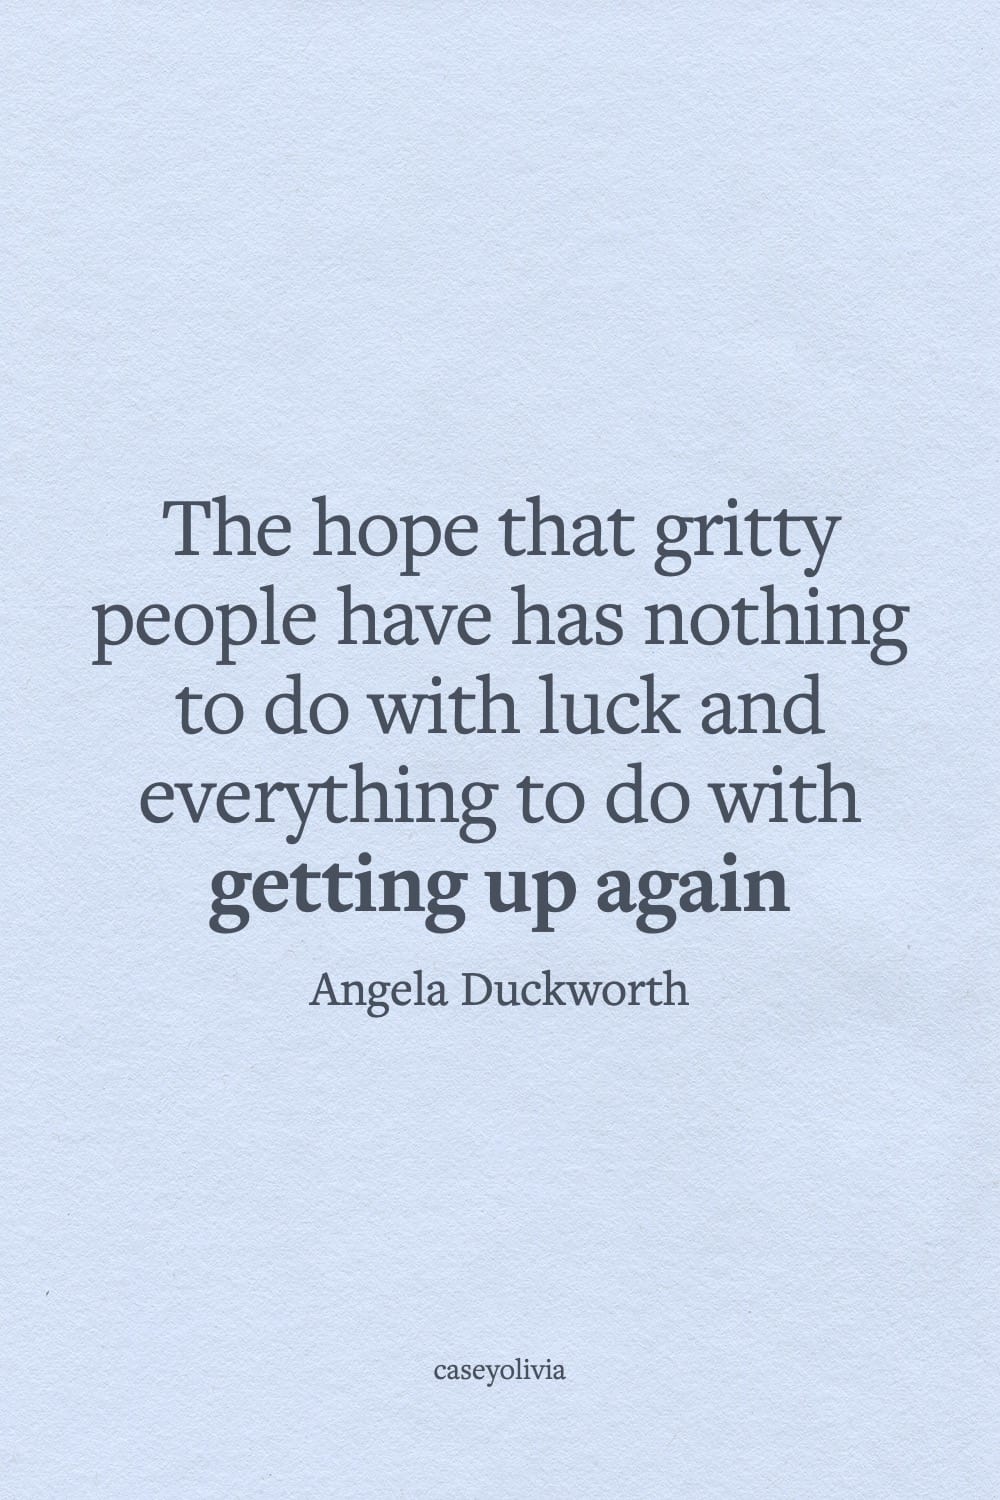 angela duckworth getting up quote about gritty people